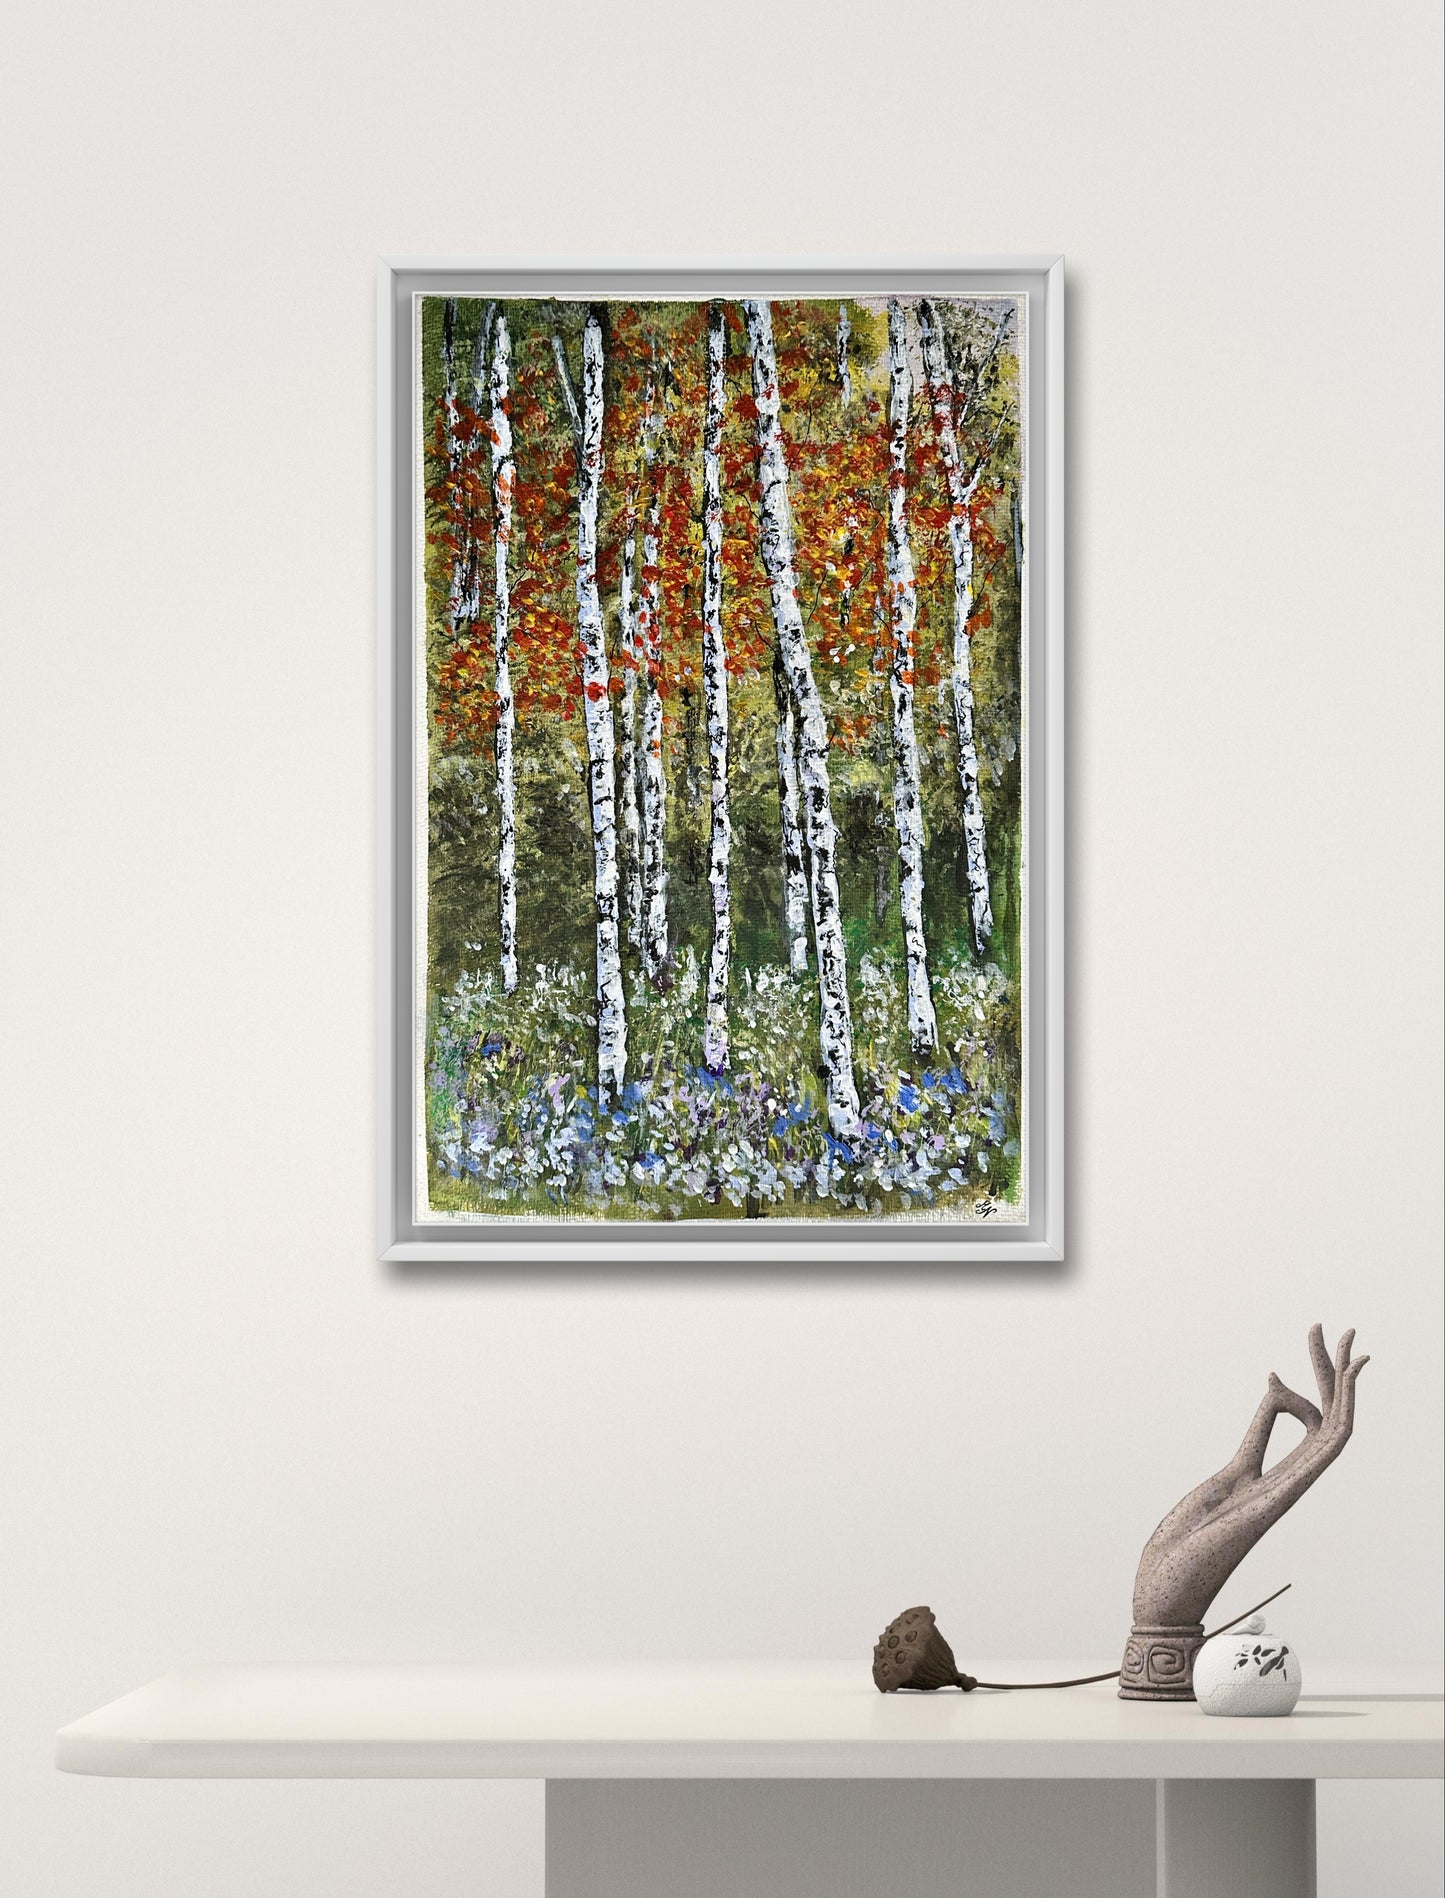 "Captivating Nature Scene" - Be captivated by the beauty and serenity of nature's embrace.